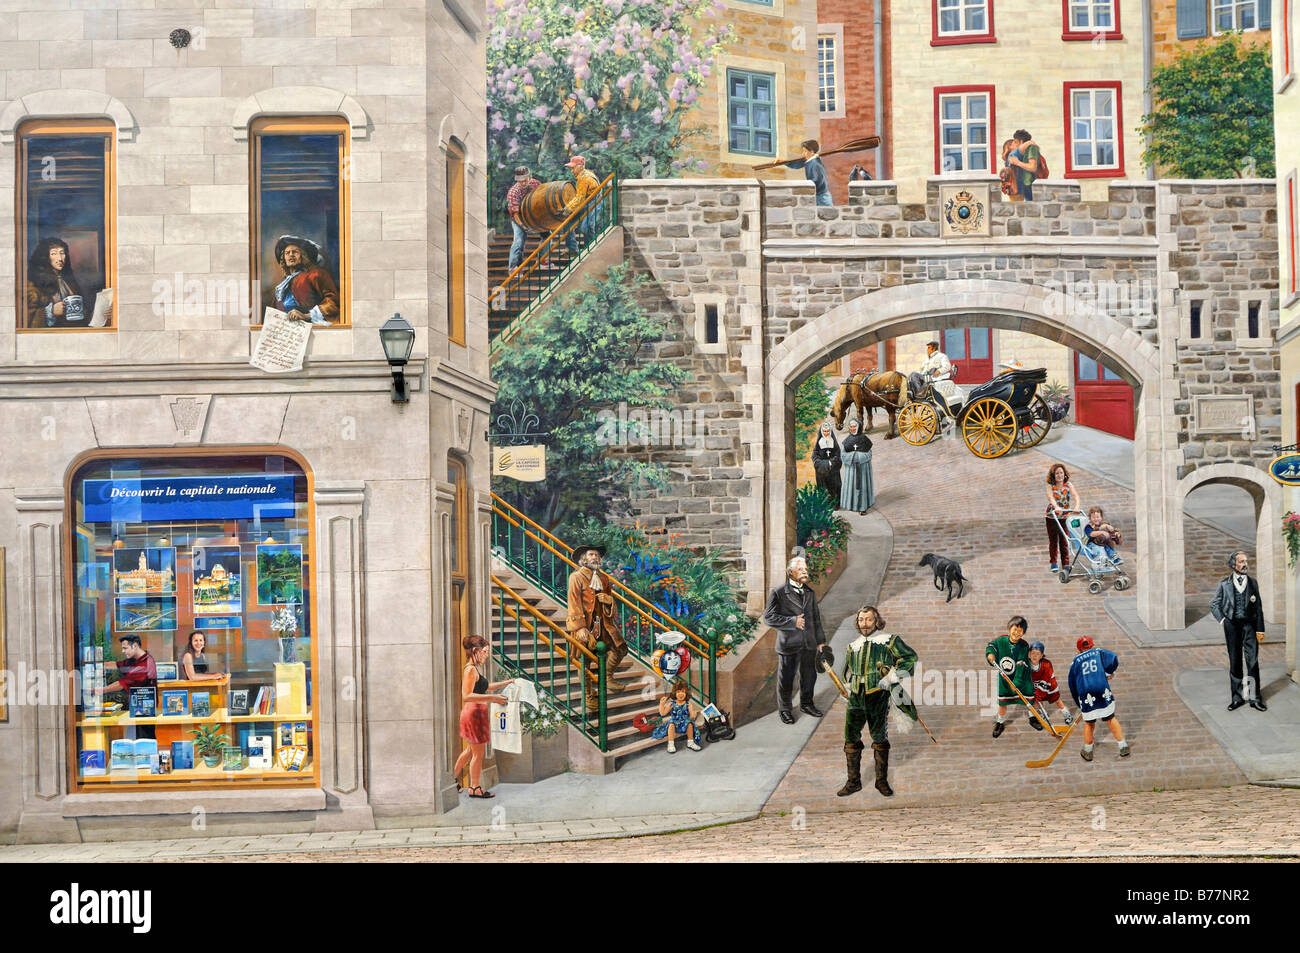 Excerpt from the picture cycle The Citizens of Quebec, Fresque des Quebecois, on Maison Soumande near the Place Royale, designe Stock Photo